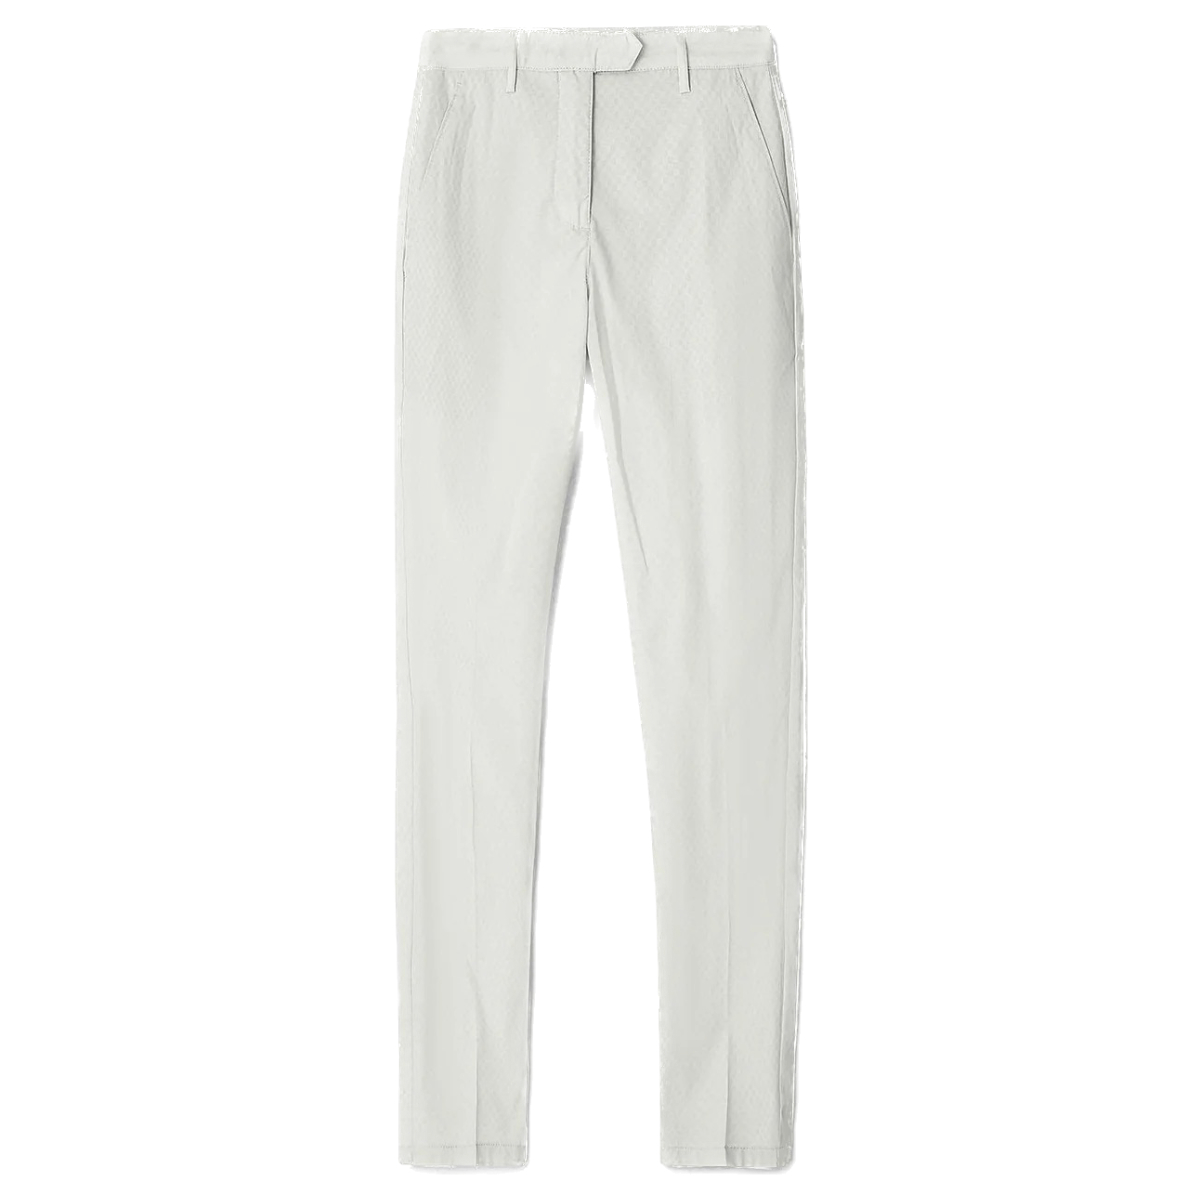 Cross Ladies Lux Chinos Tint Check